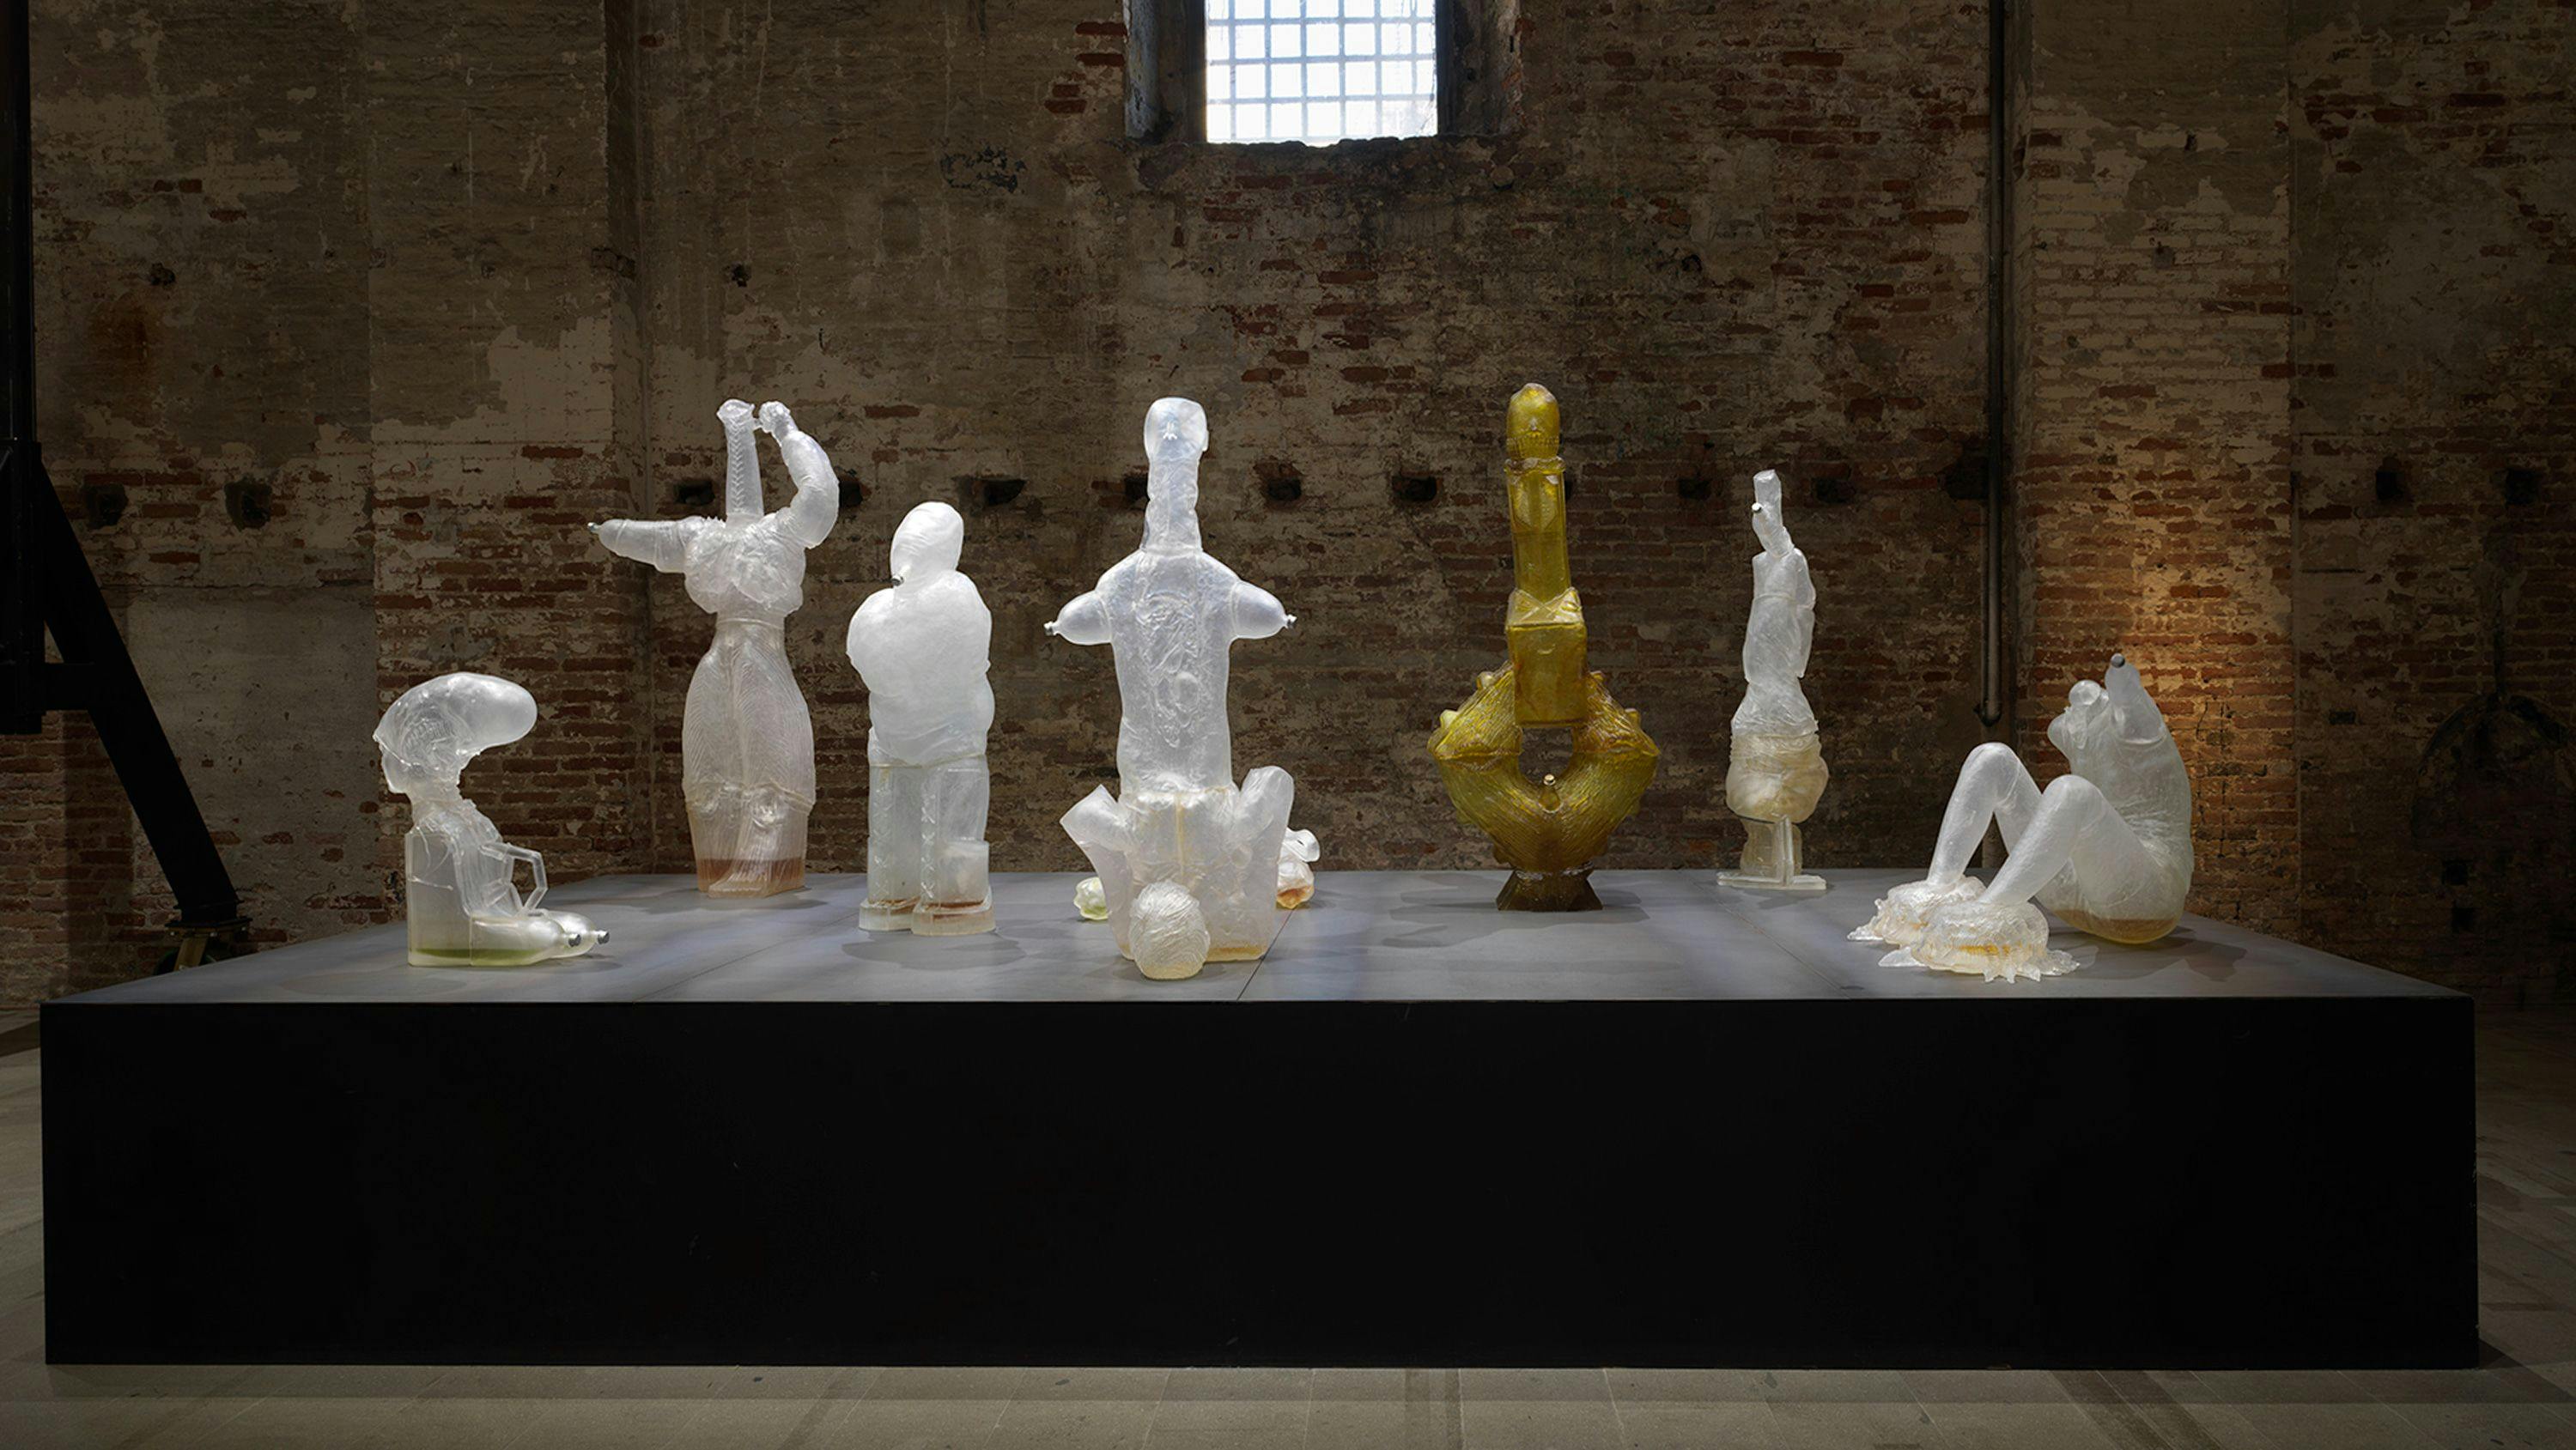 Installation view of work titled Nobodies by Andra Ursuta, in the 58th International Art Exhibition La Biennale di Venezia, dated 2019.